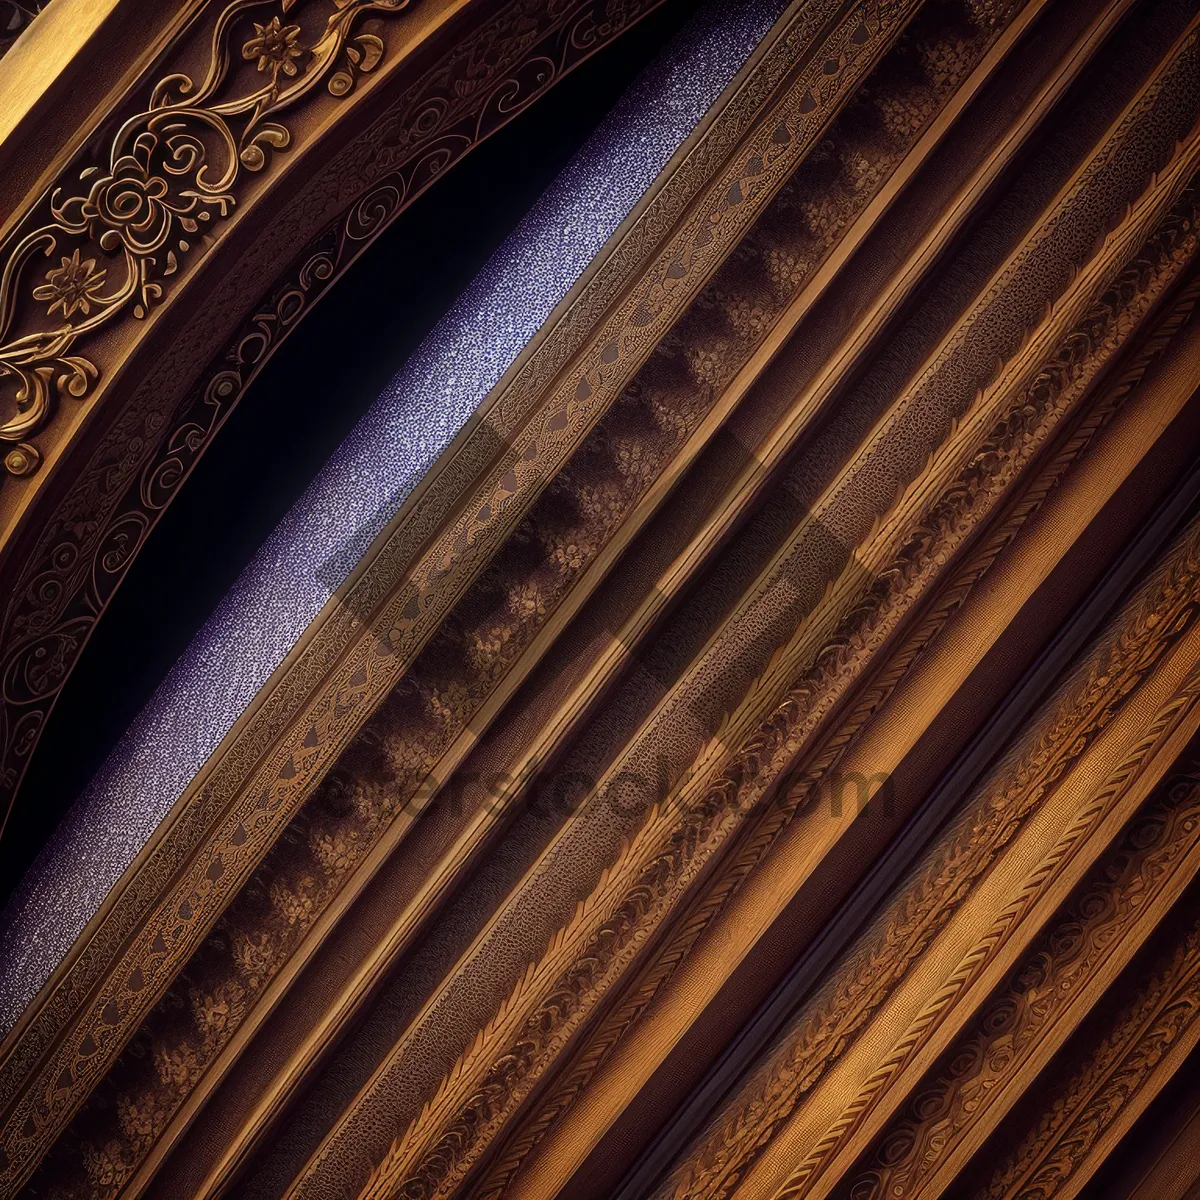 Picture of Old Theater Curtain in Historic Building